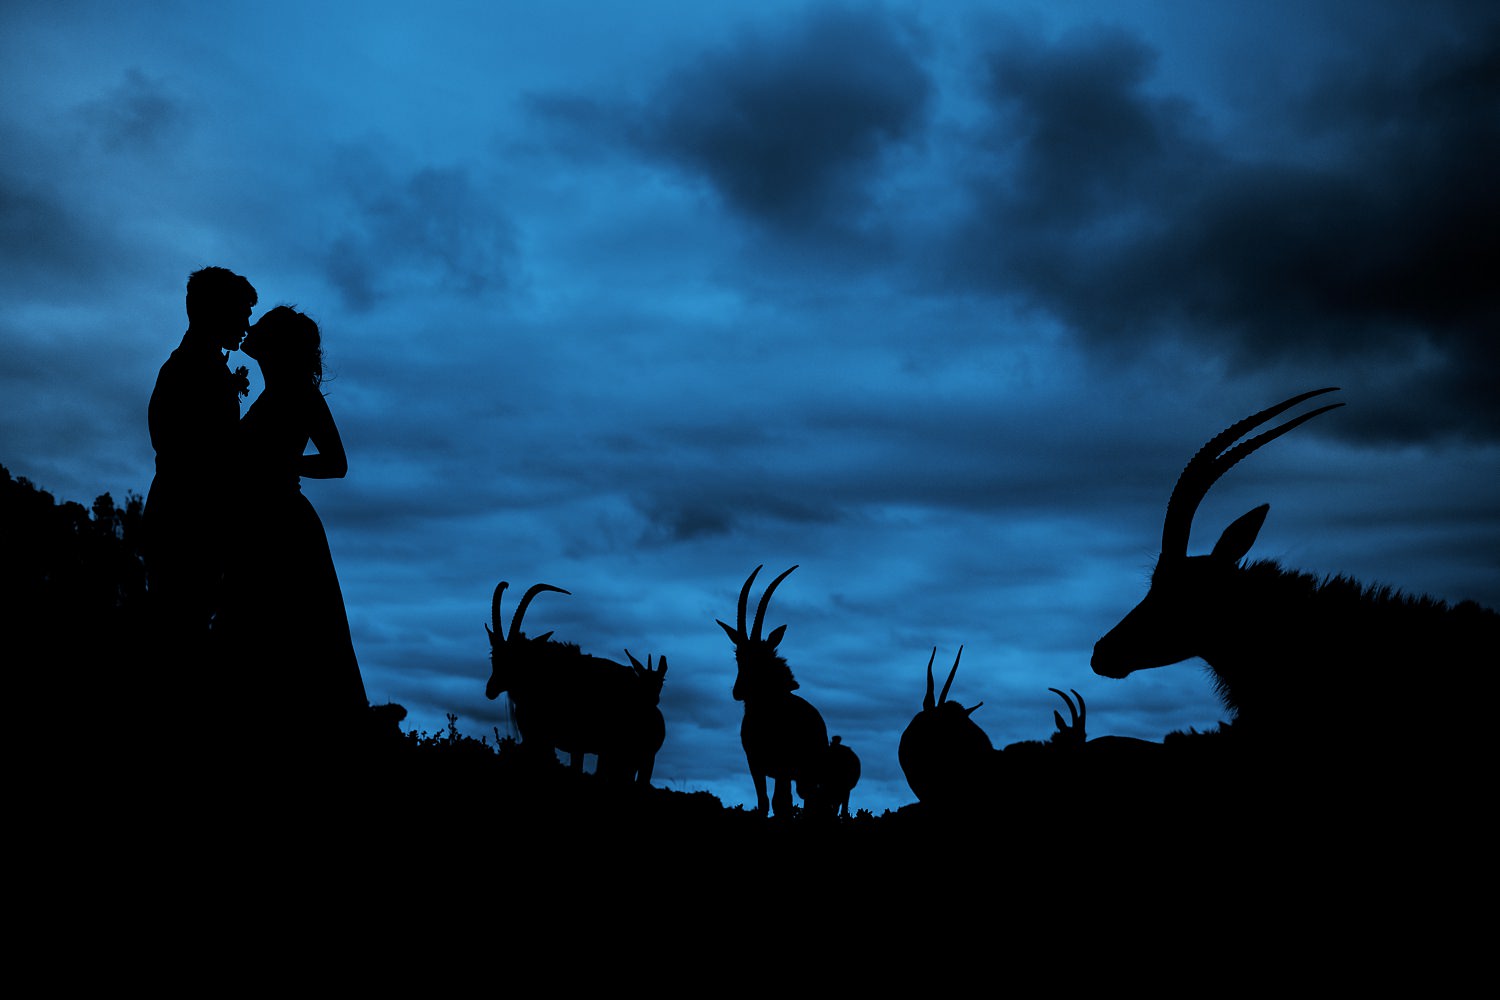 A beautiful post-sunset silhouette safari wedding portrait during blue hour at Oceana Wildlife Reserve featuring Sable antelope by wedding photographer in South Africa, Niki M Photography